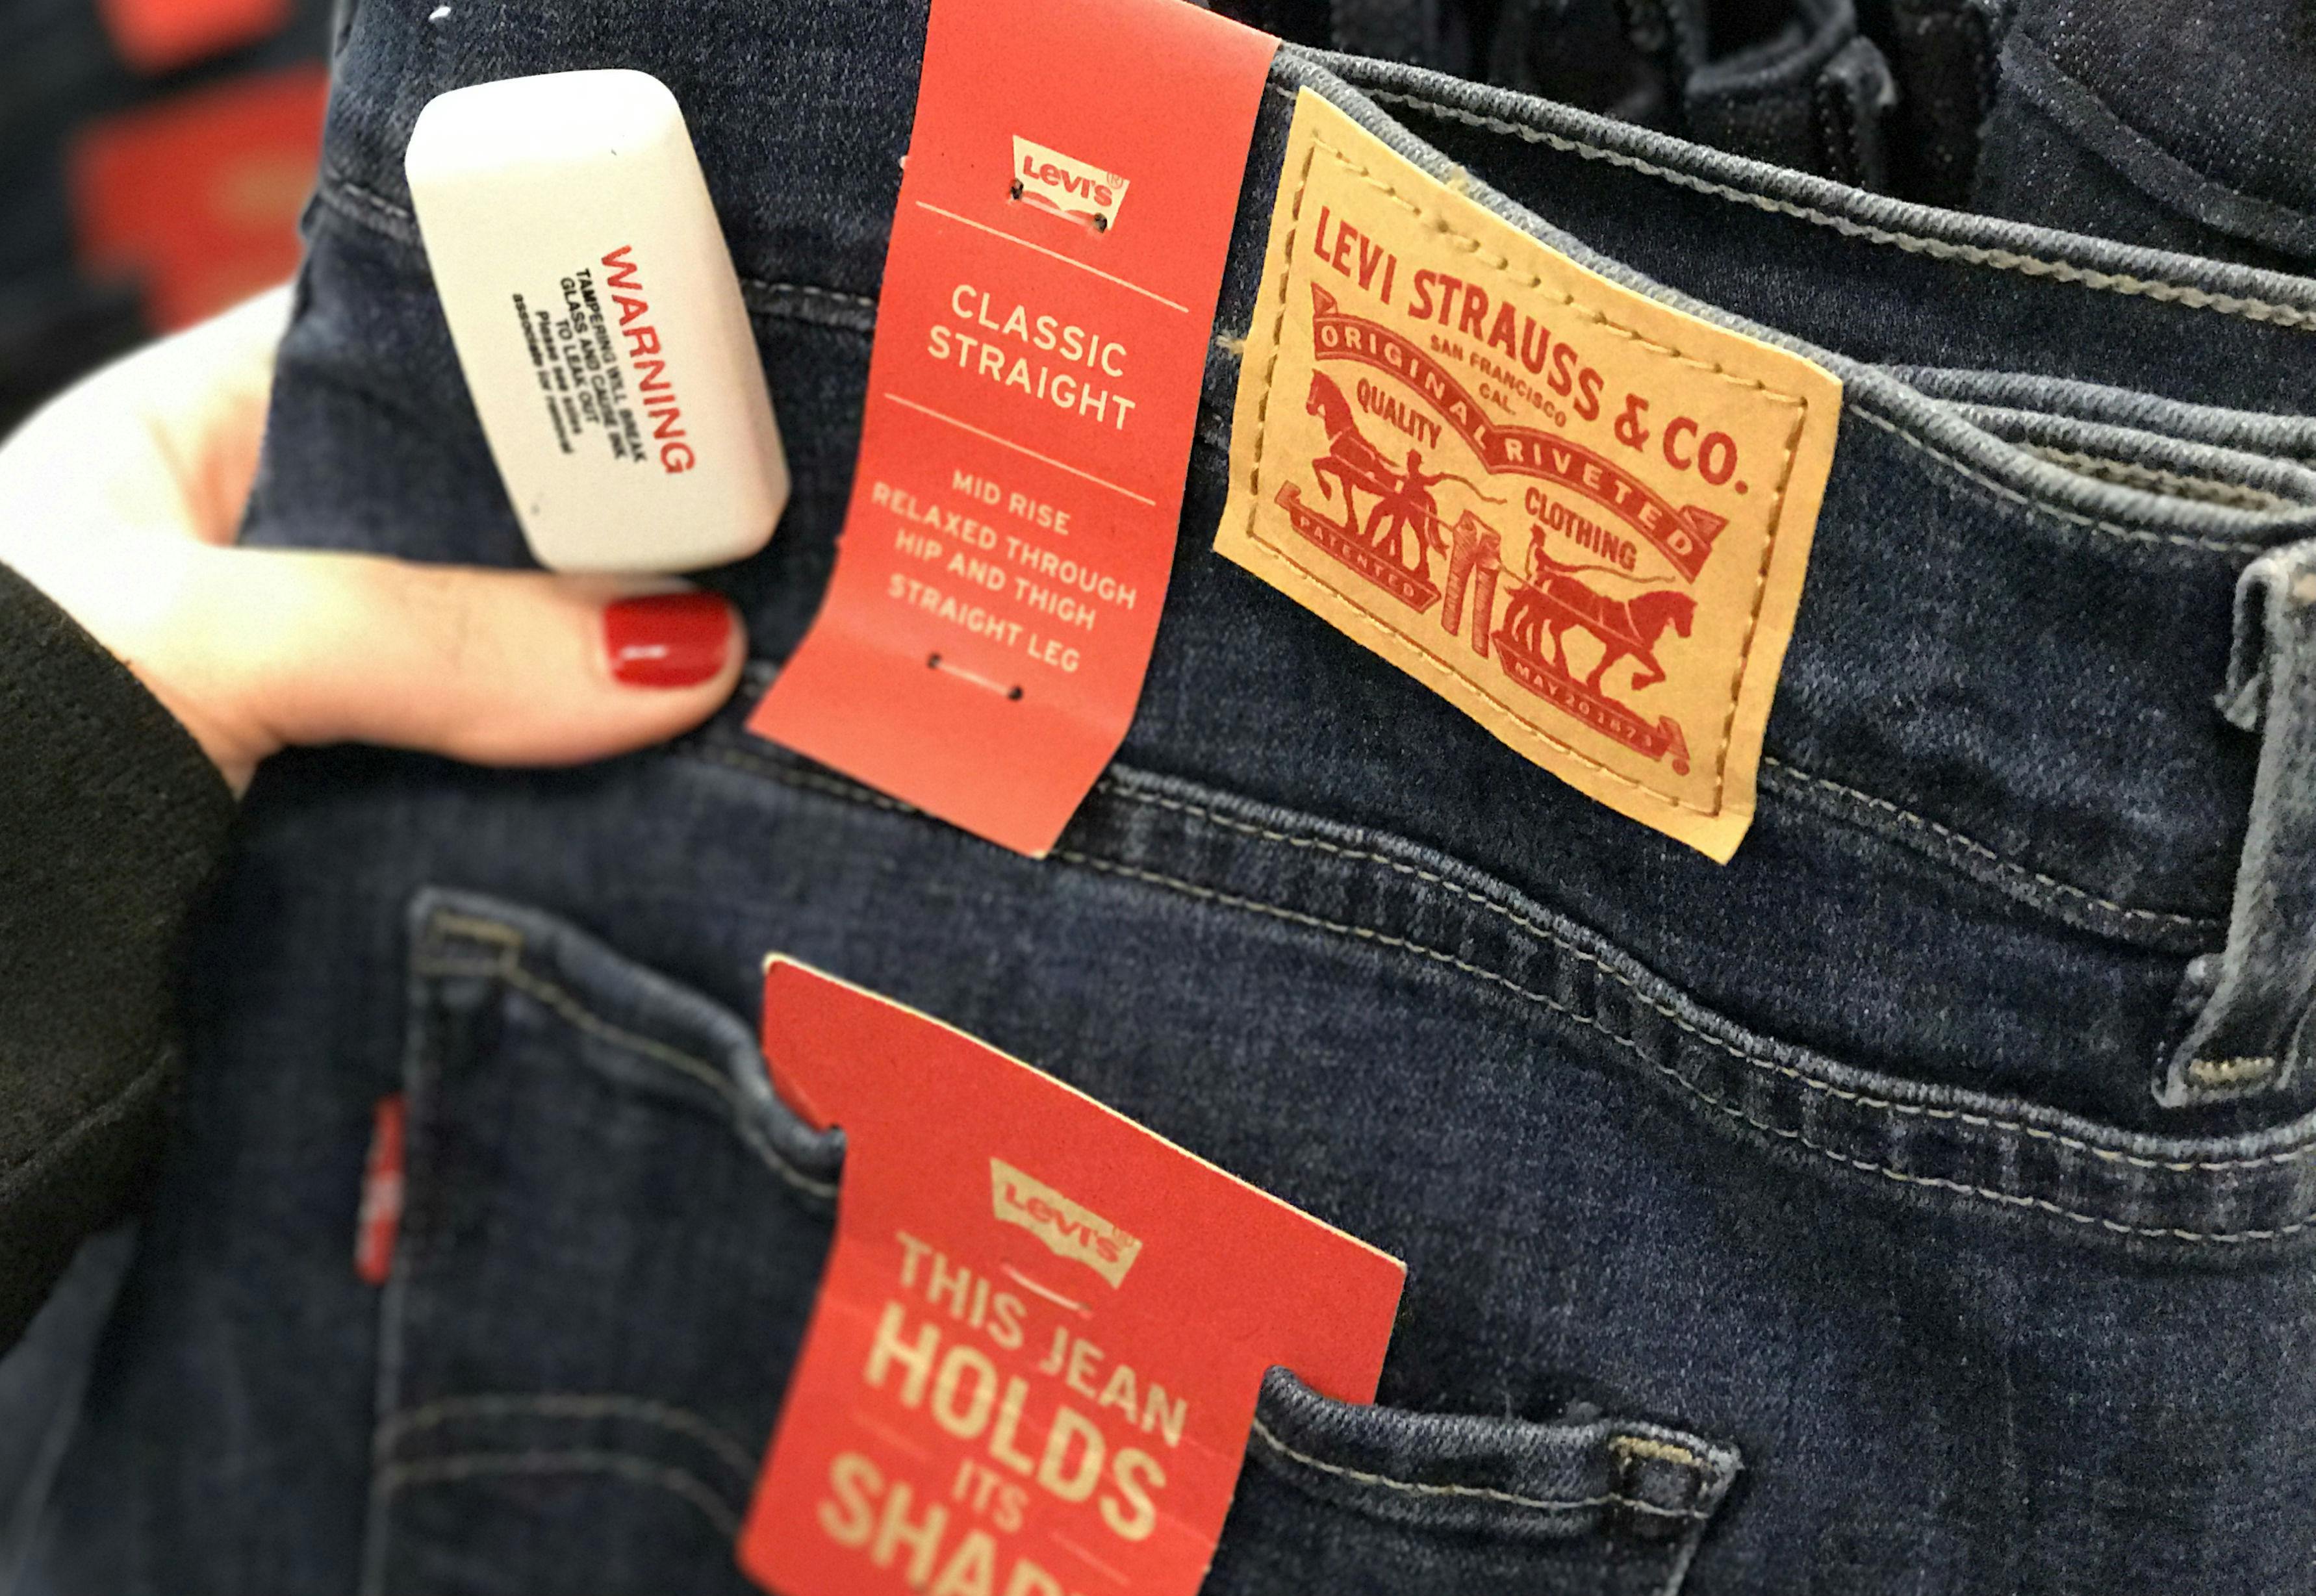 How to Get Your Favorite Jeans up to 75% Off - The Krazy Coupon Lady